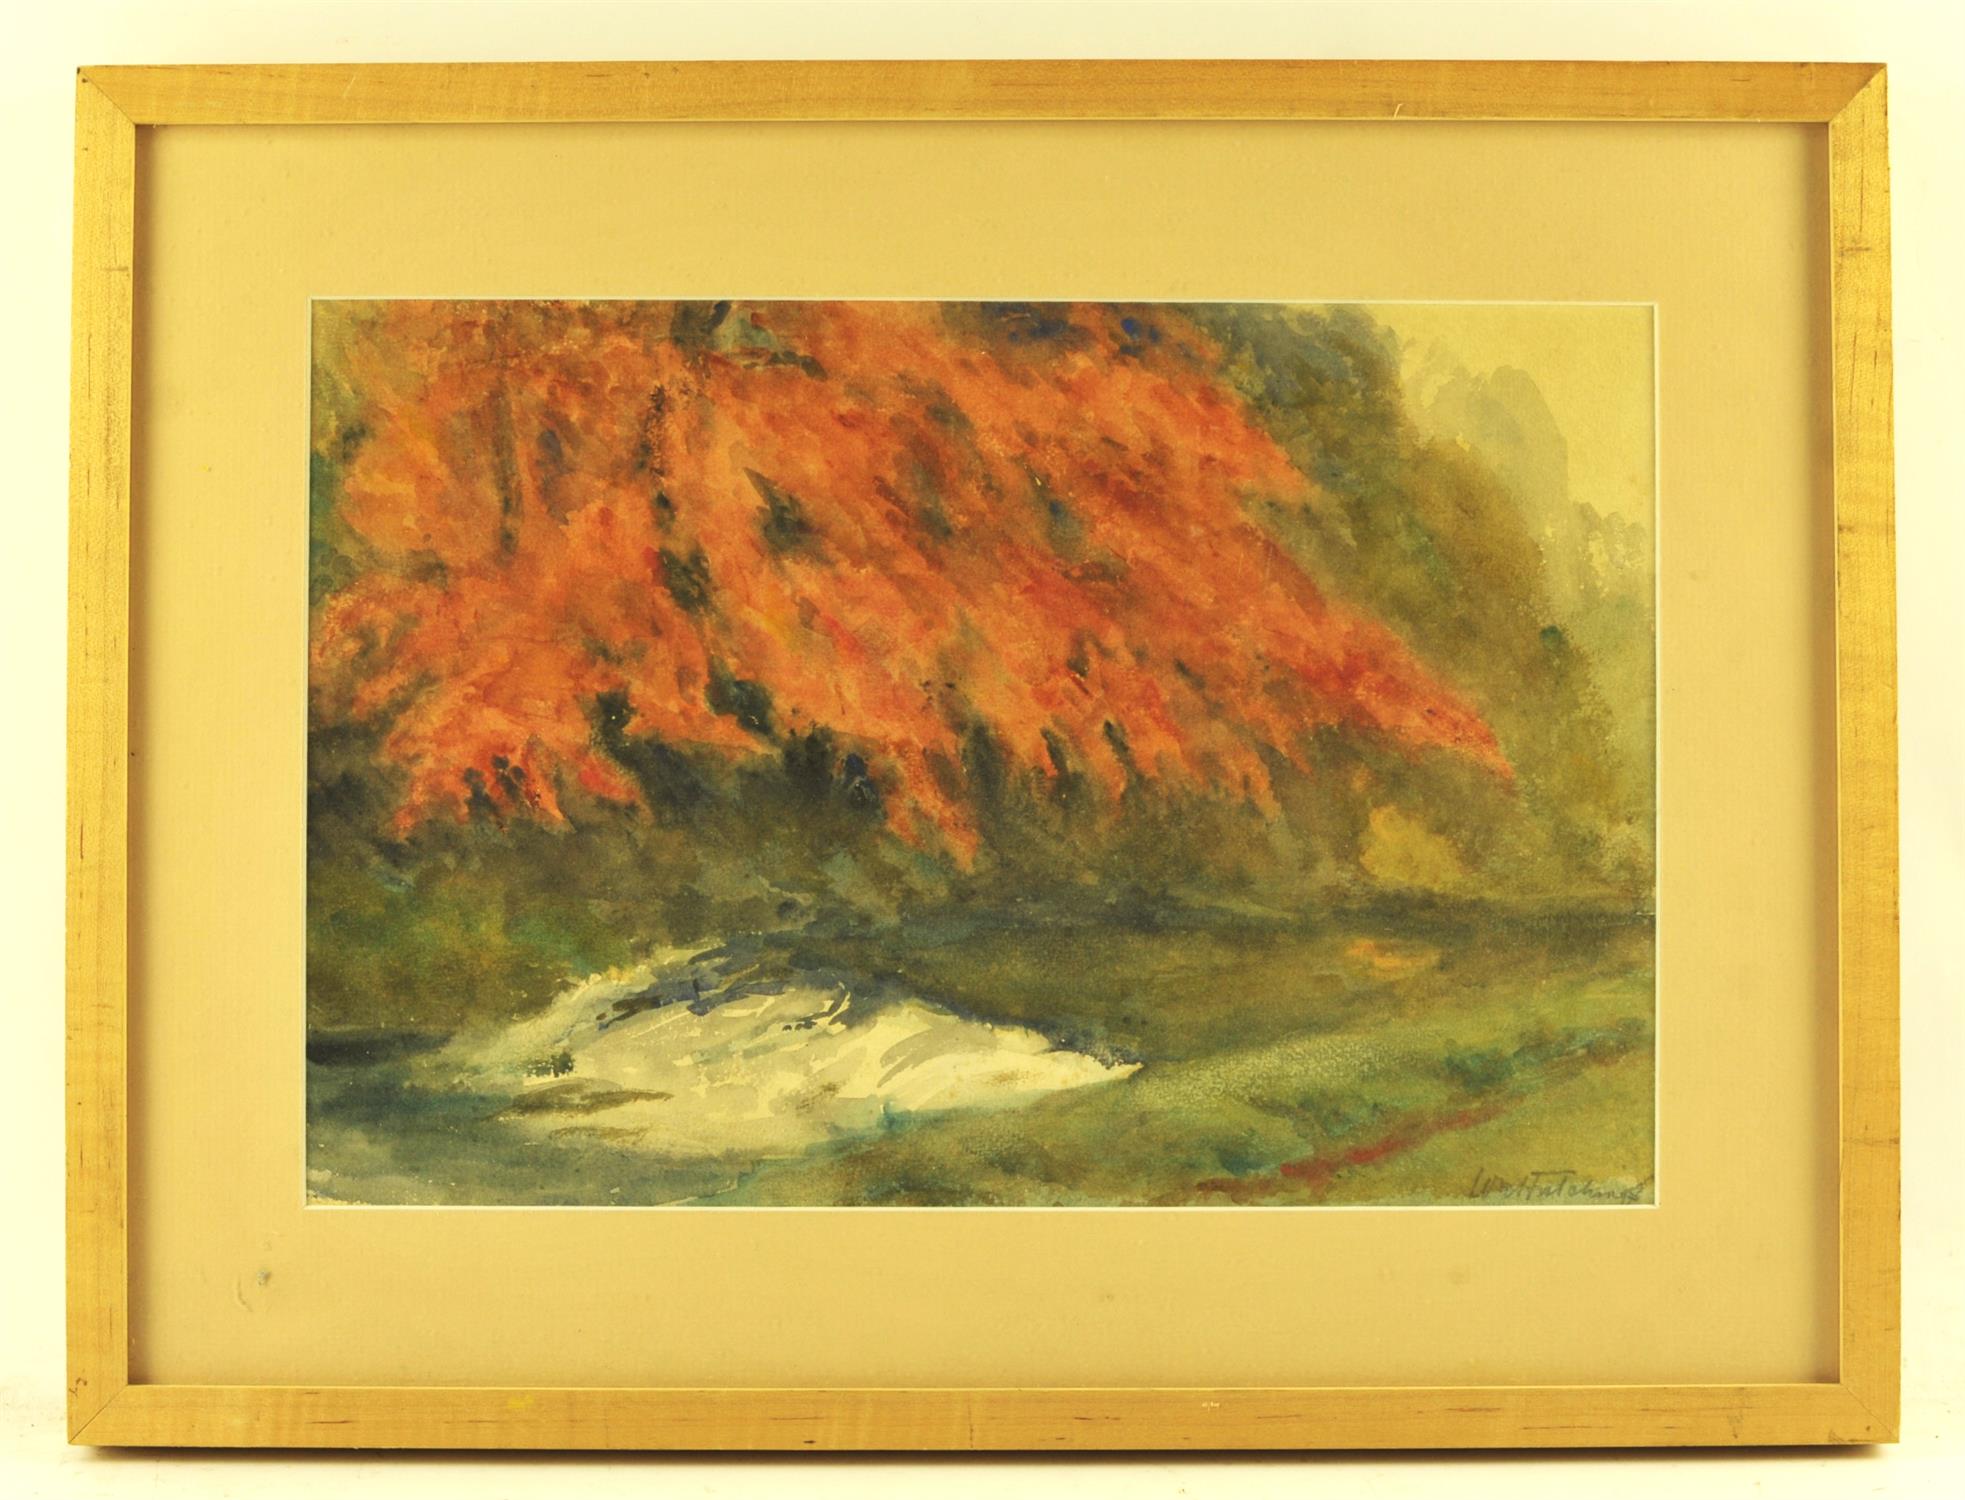 British School (20th Century), ‘Glanyrafor’ An Autumnal Landscape, watercolour, indistinctly signed